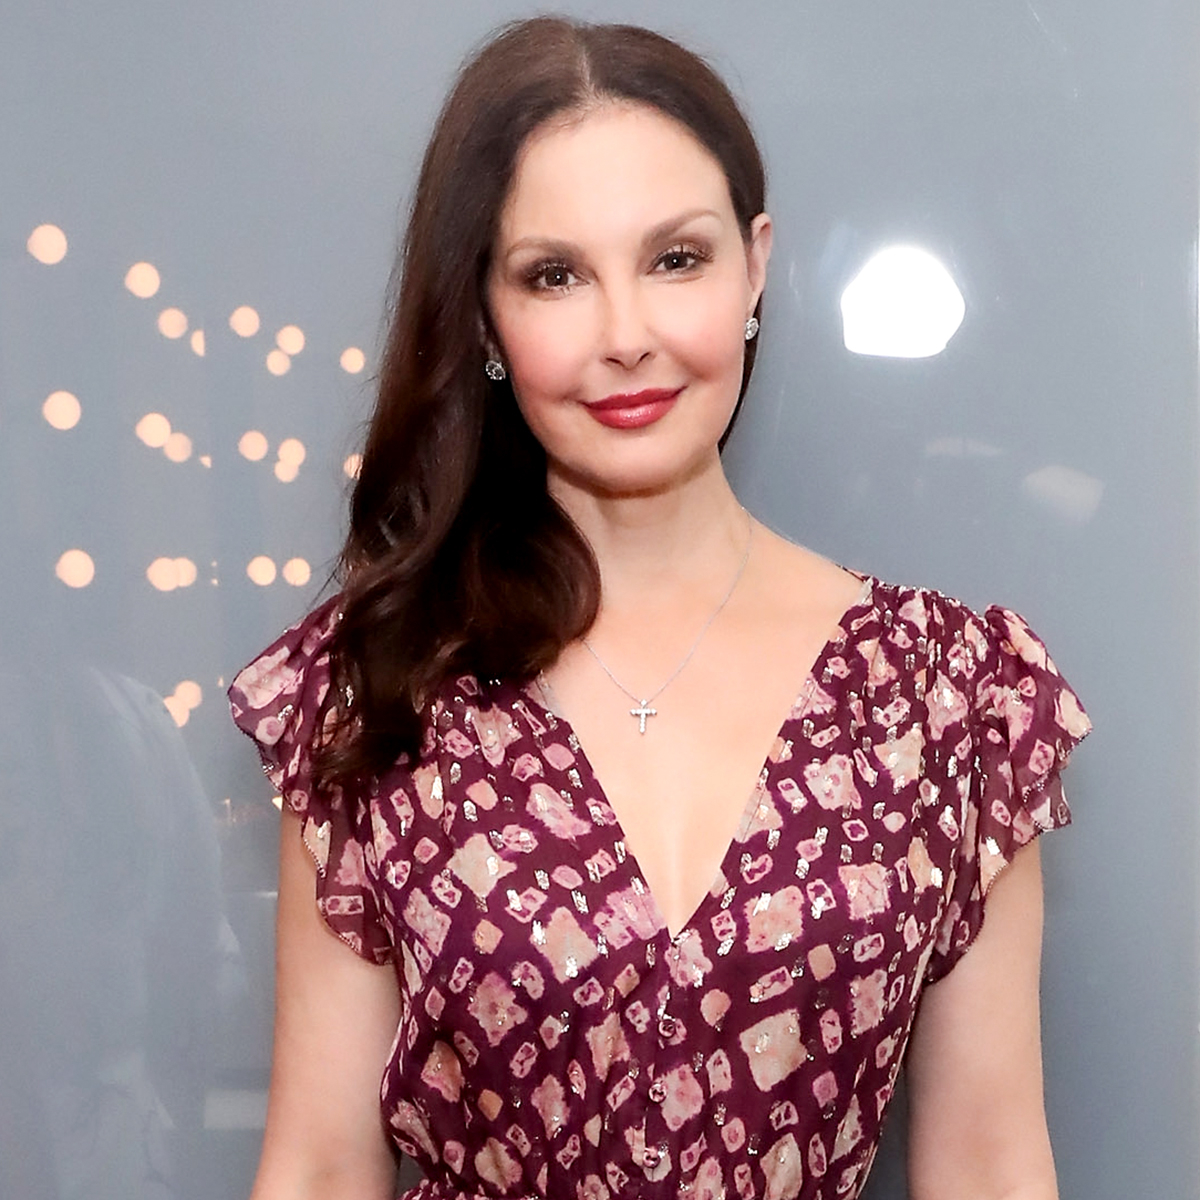 Rs 1200x1200 210212125150 1200 Ashley Judd GettyImages 952443512 ?fit=around|1080 1080&output Quality=90&crop=1080 1080;center,top